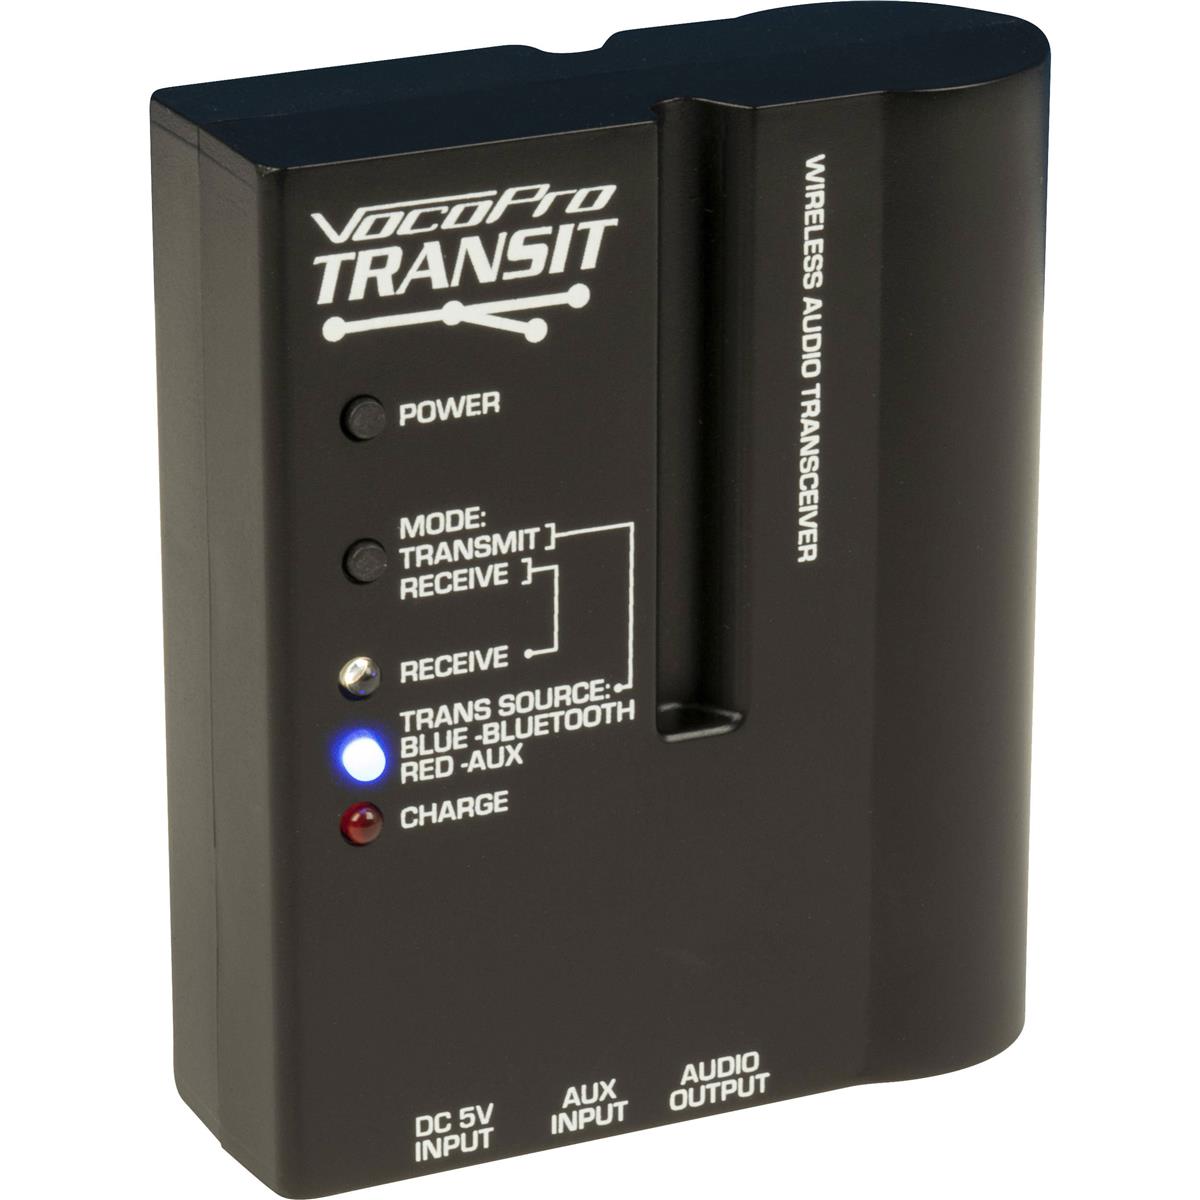 Image of VocoPro TRANSIT Stereo Wireless Transceiver with Bluetooth for Powered Speakers